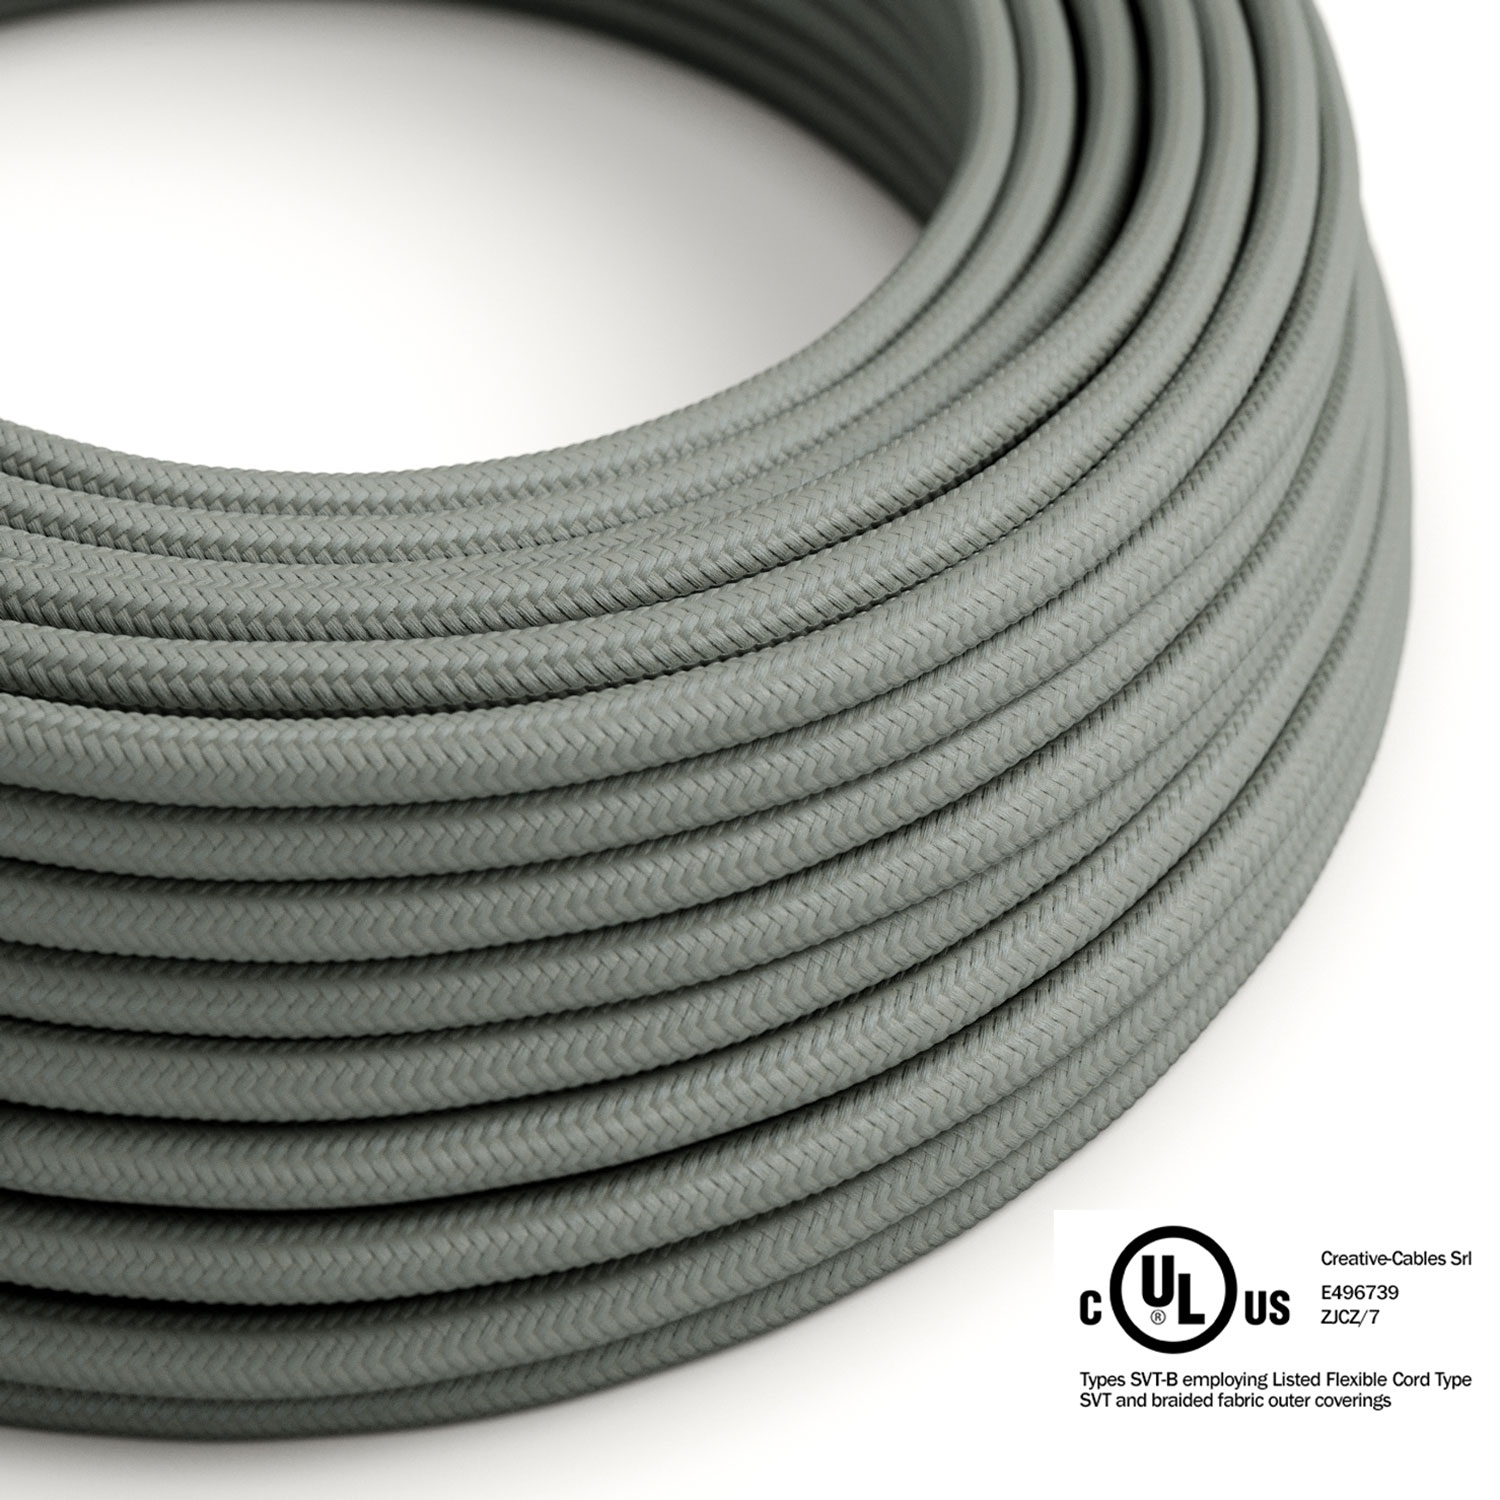 https://www.creative-cables.us/71765-big_default/gray-rayon-covered-round-electric-cable-rm03.jpg